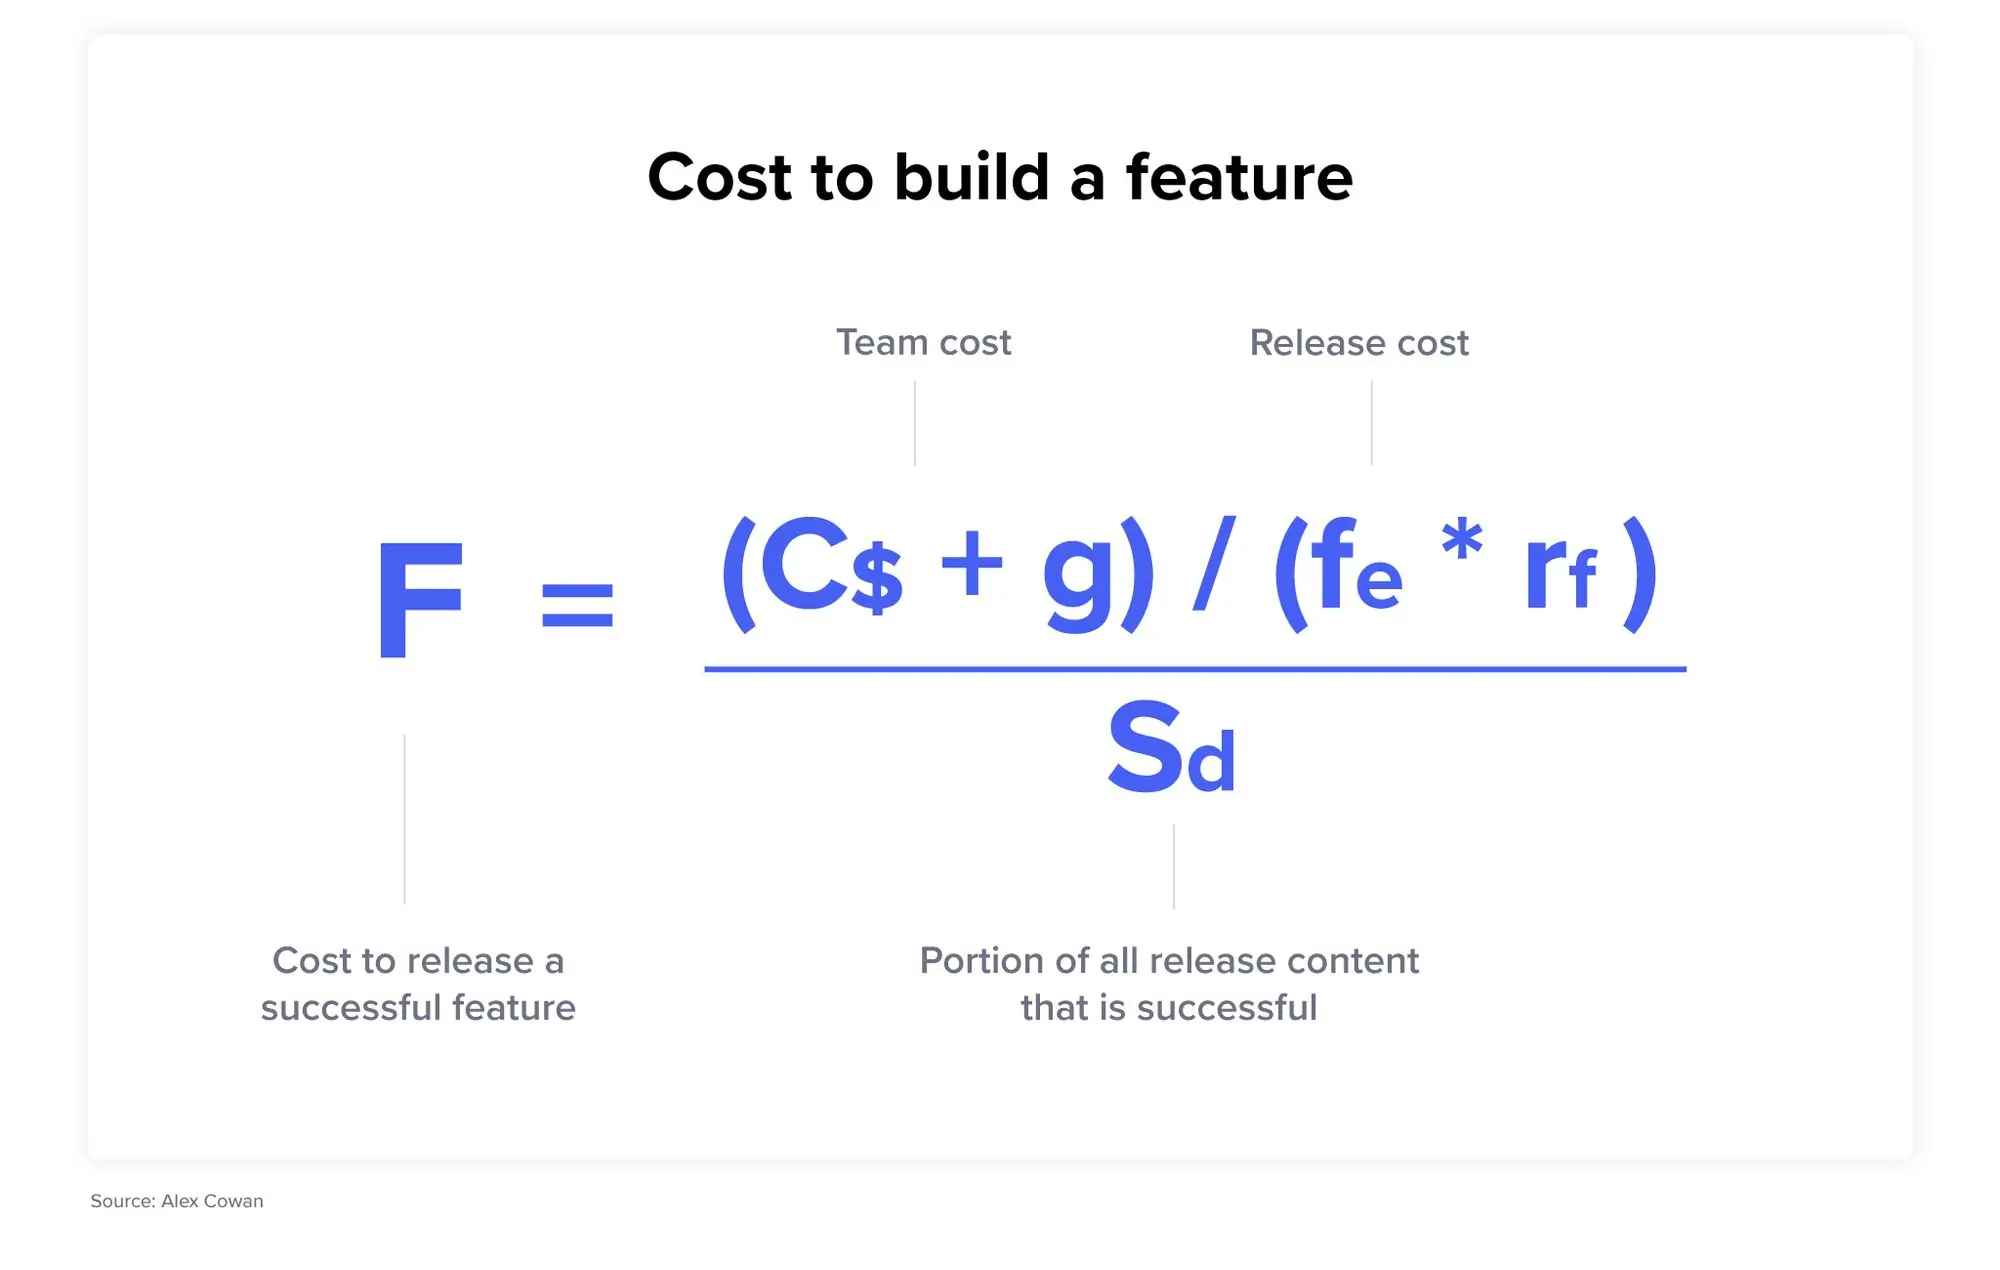 Cost to build a feature formula. F = ((C+g)/(fe*rf))/Sd